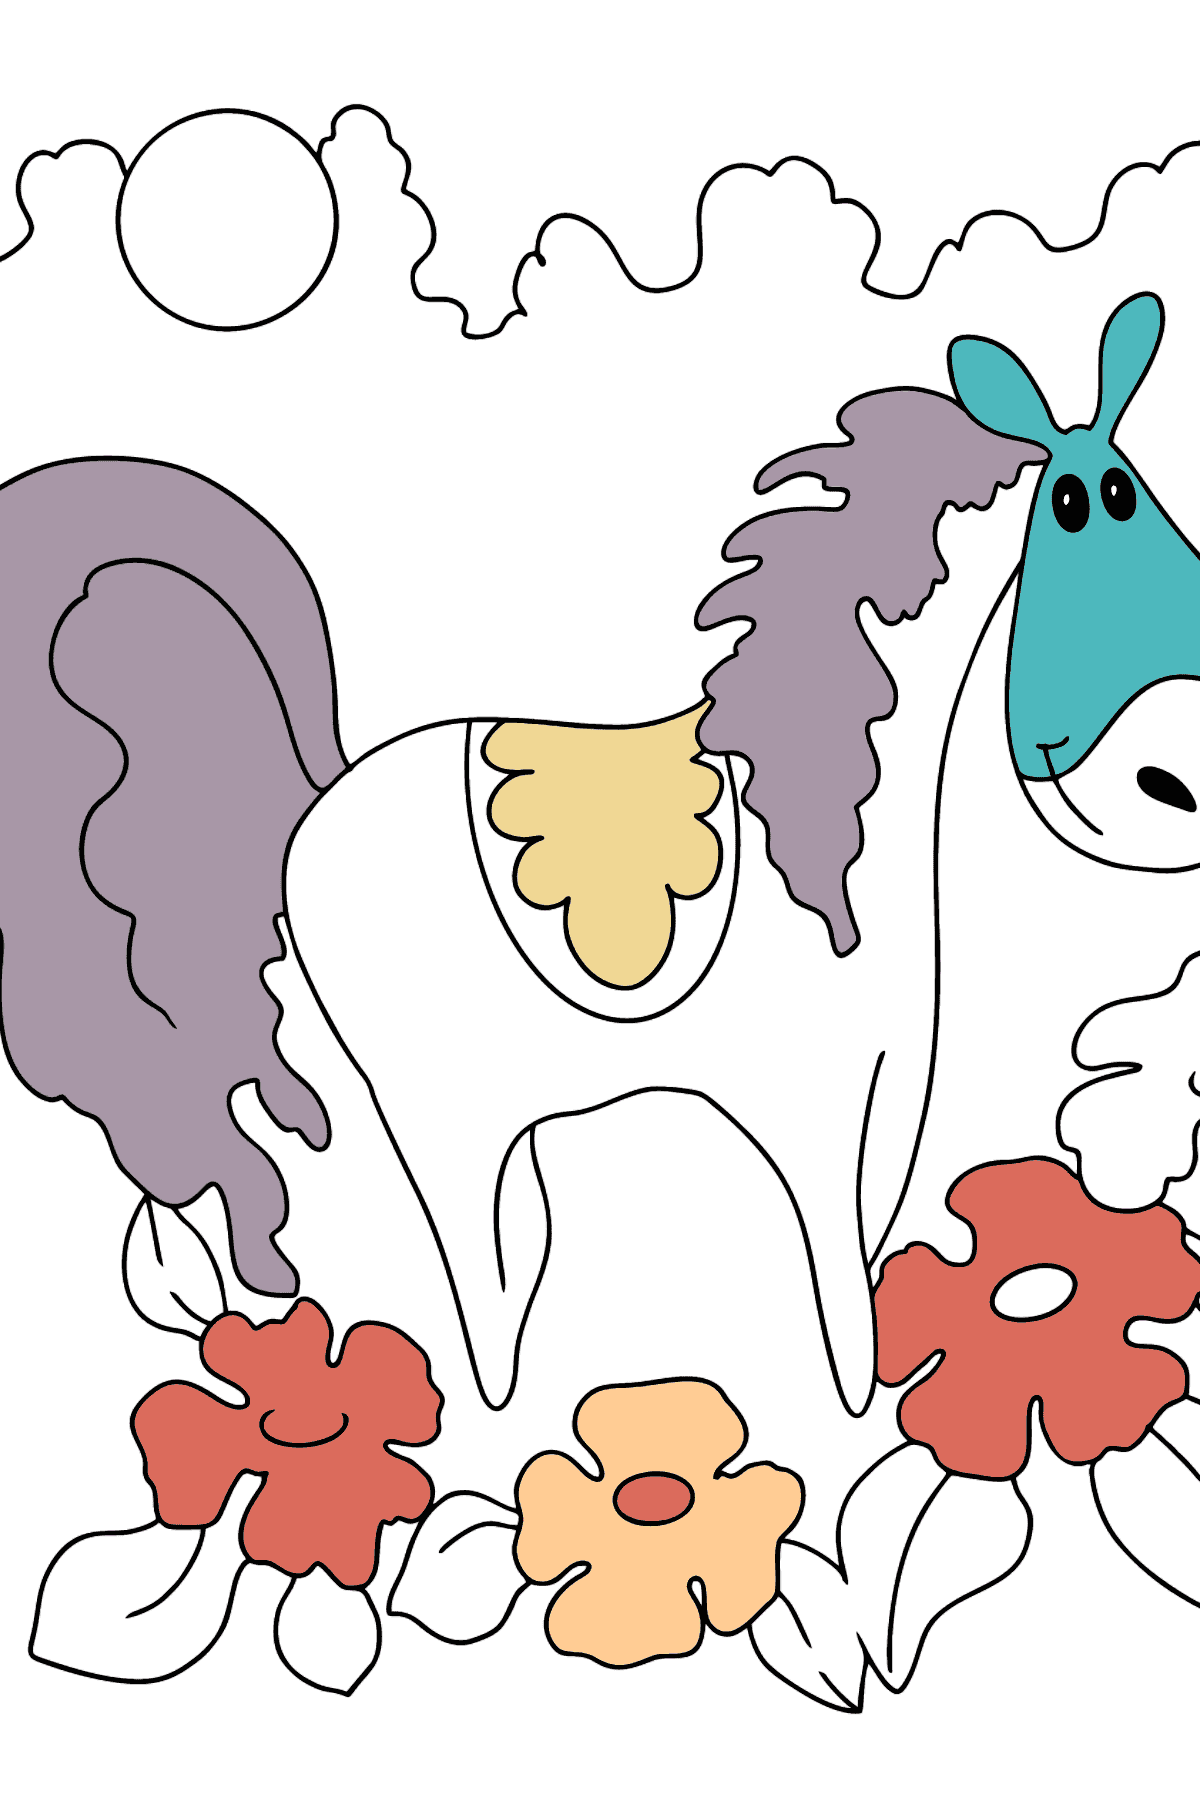 Coloring page a horse in flowers - Coloring Pages for Kids